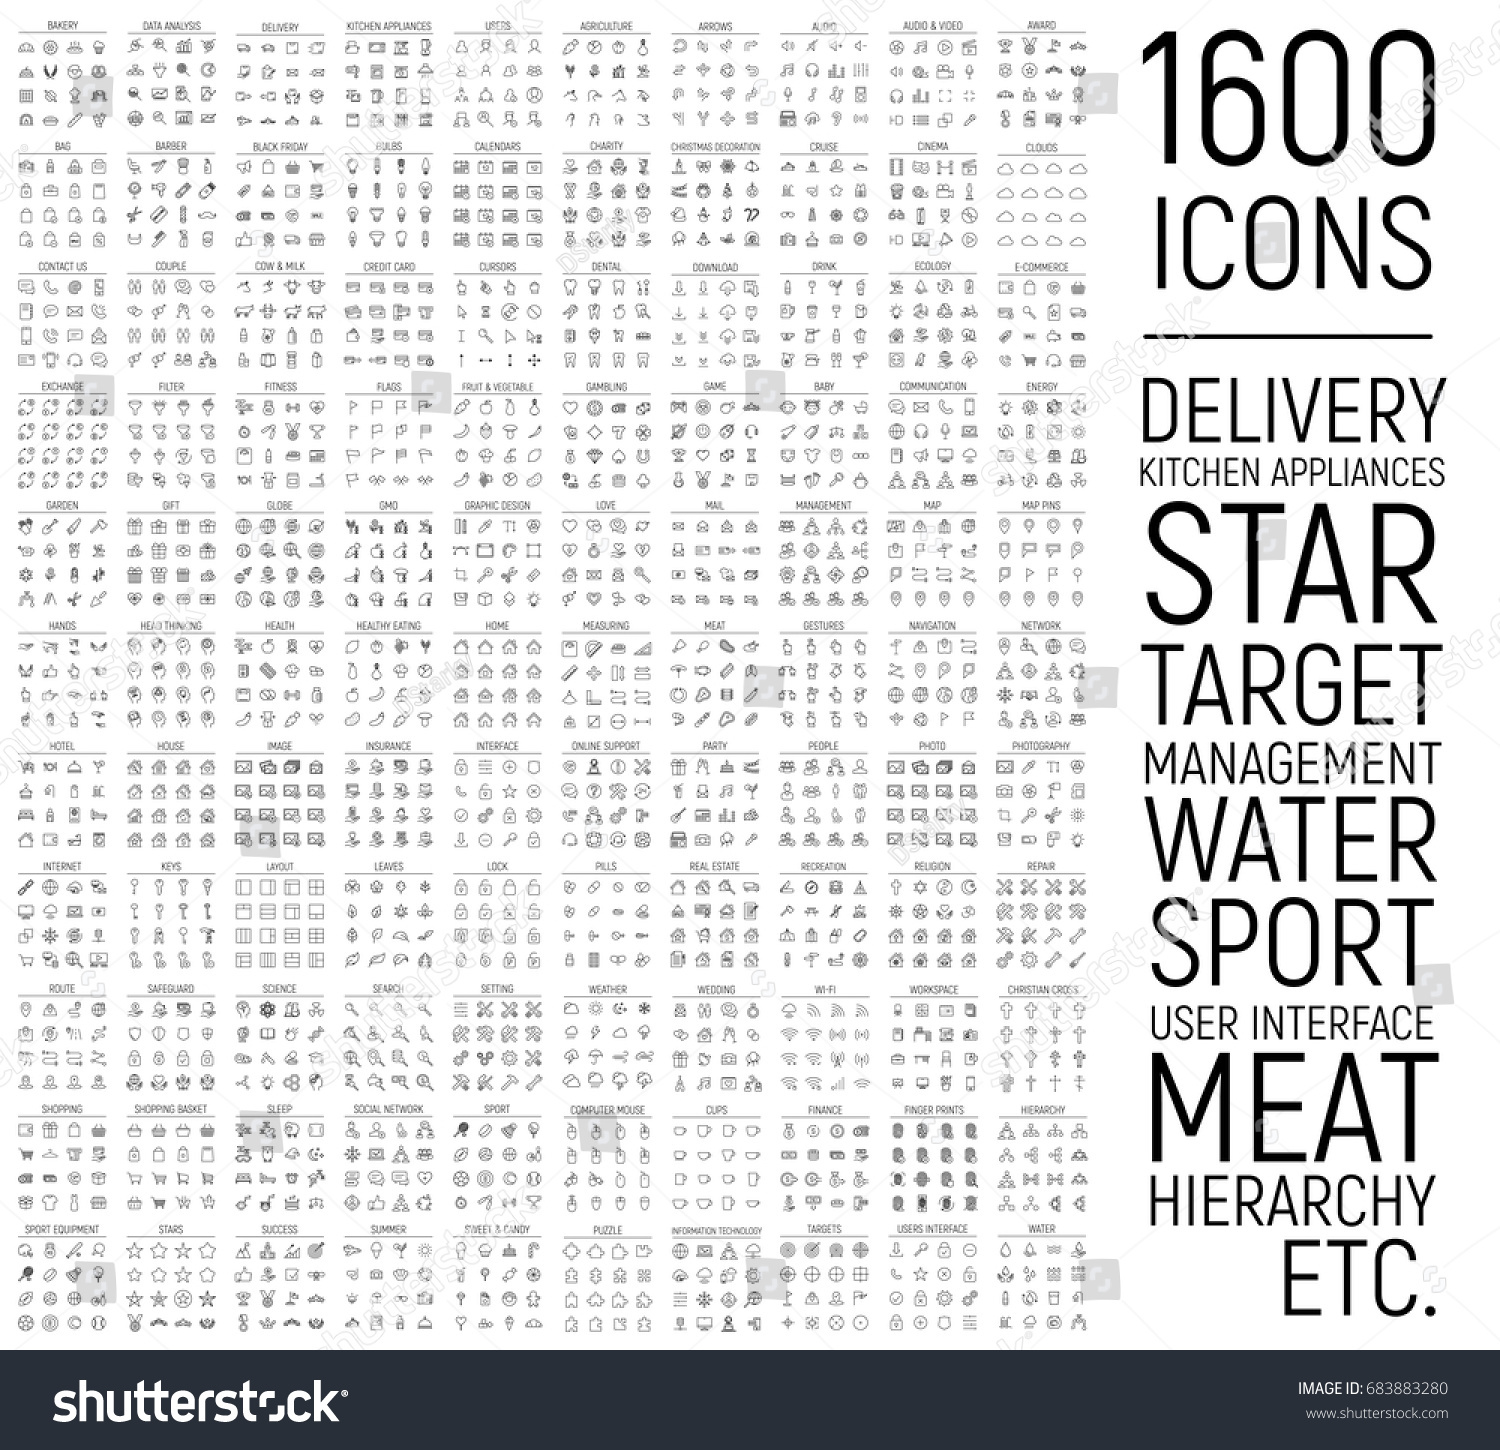 Exclusive 1600 thin line icons set. Big package of modern minimalistic pictograms for mobile UI/UX kit, infographics and web sites. High quality delivery, meat, water, sport, target and other signs #683883280